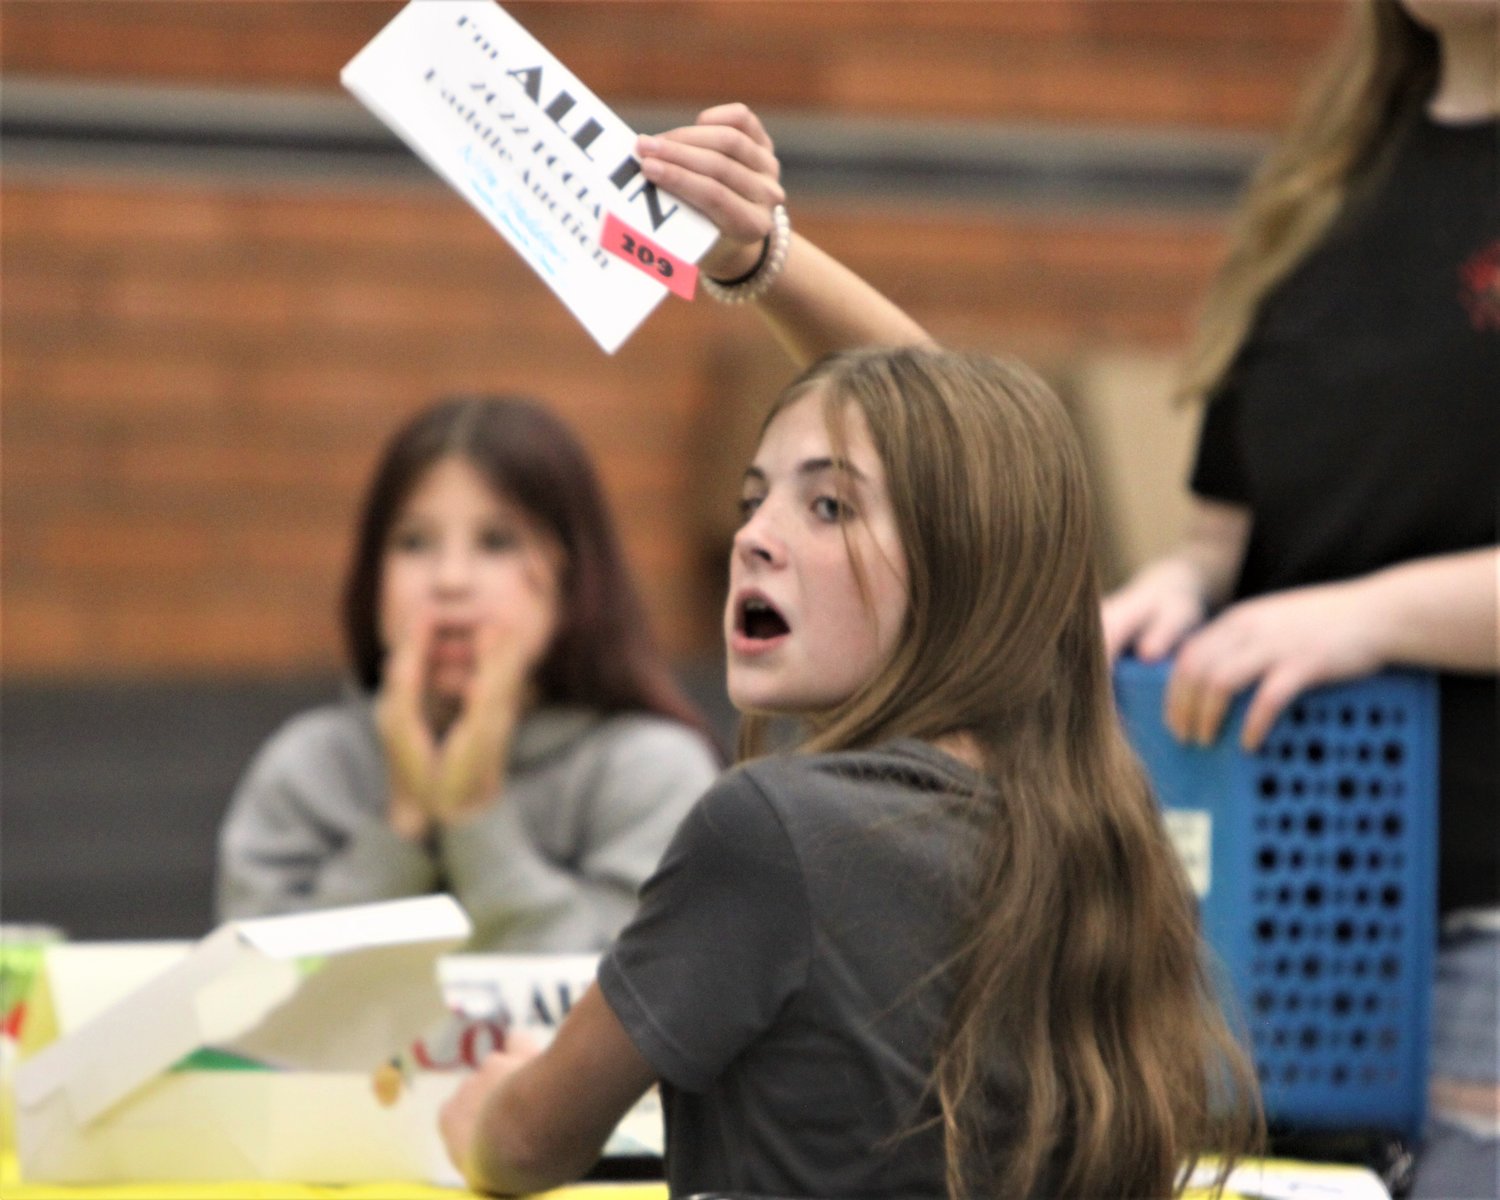 Harper Monsen of Montgomery City shows her all-in paddle during the Ninth Annual FCCLA Paddle Auction on Nov. 5 at the Montgomery County Middle School multipurpose room.